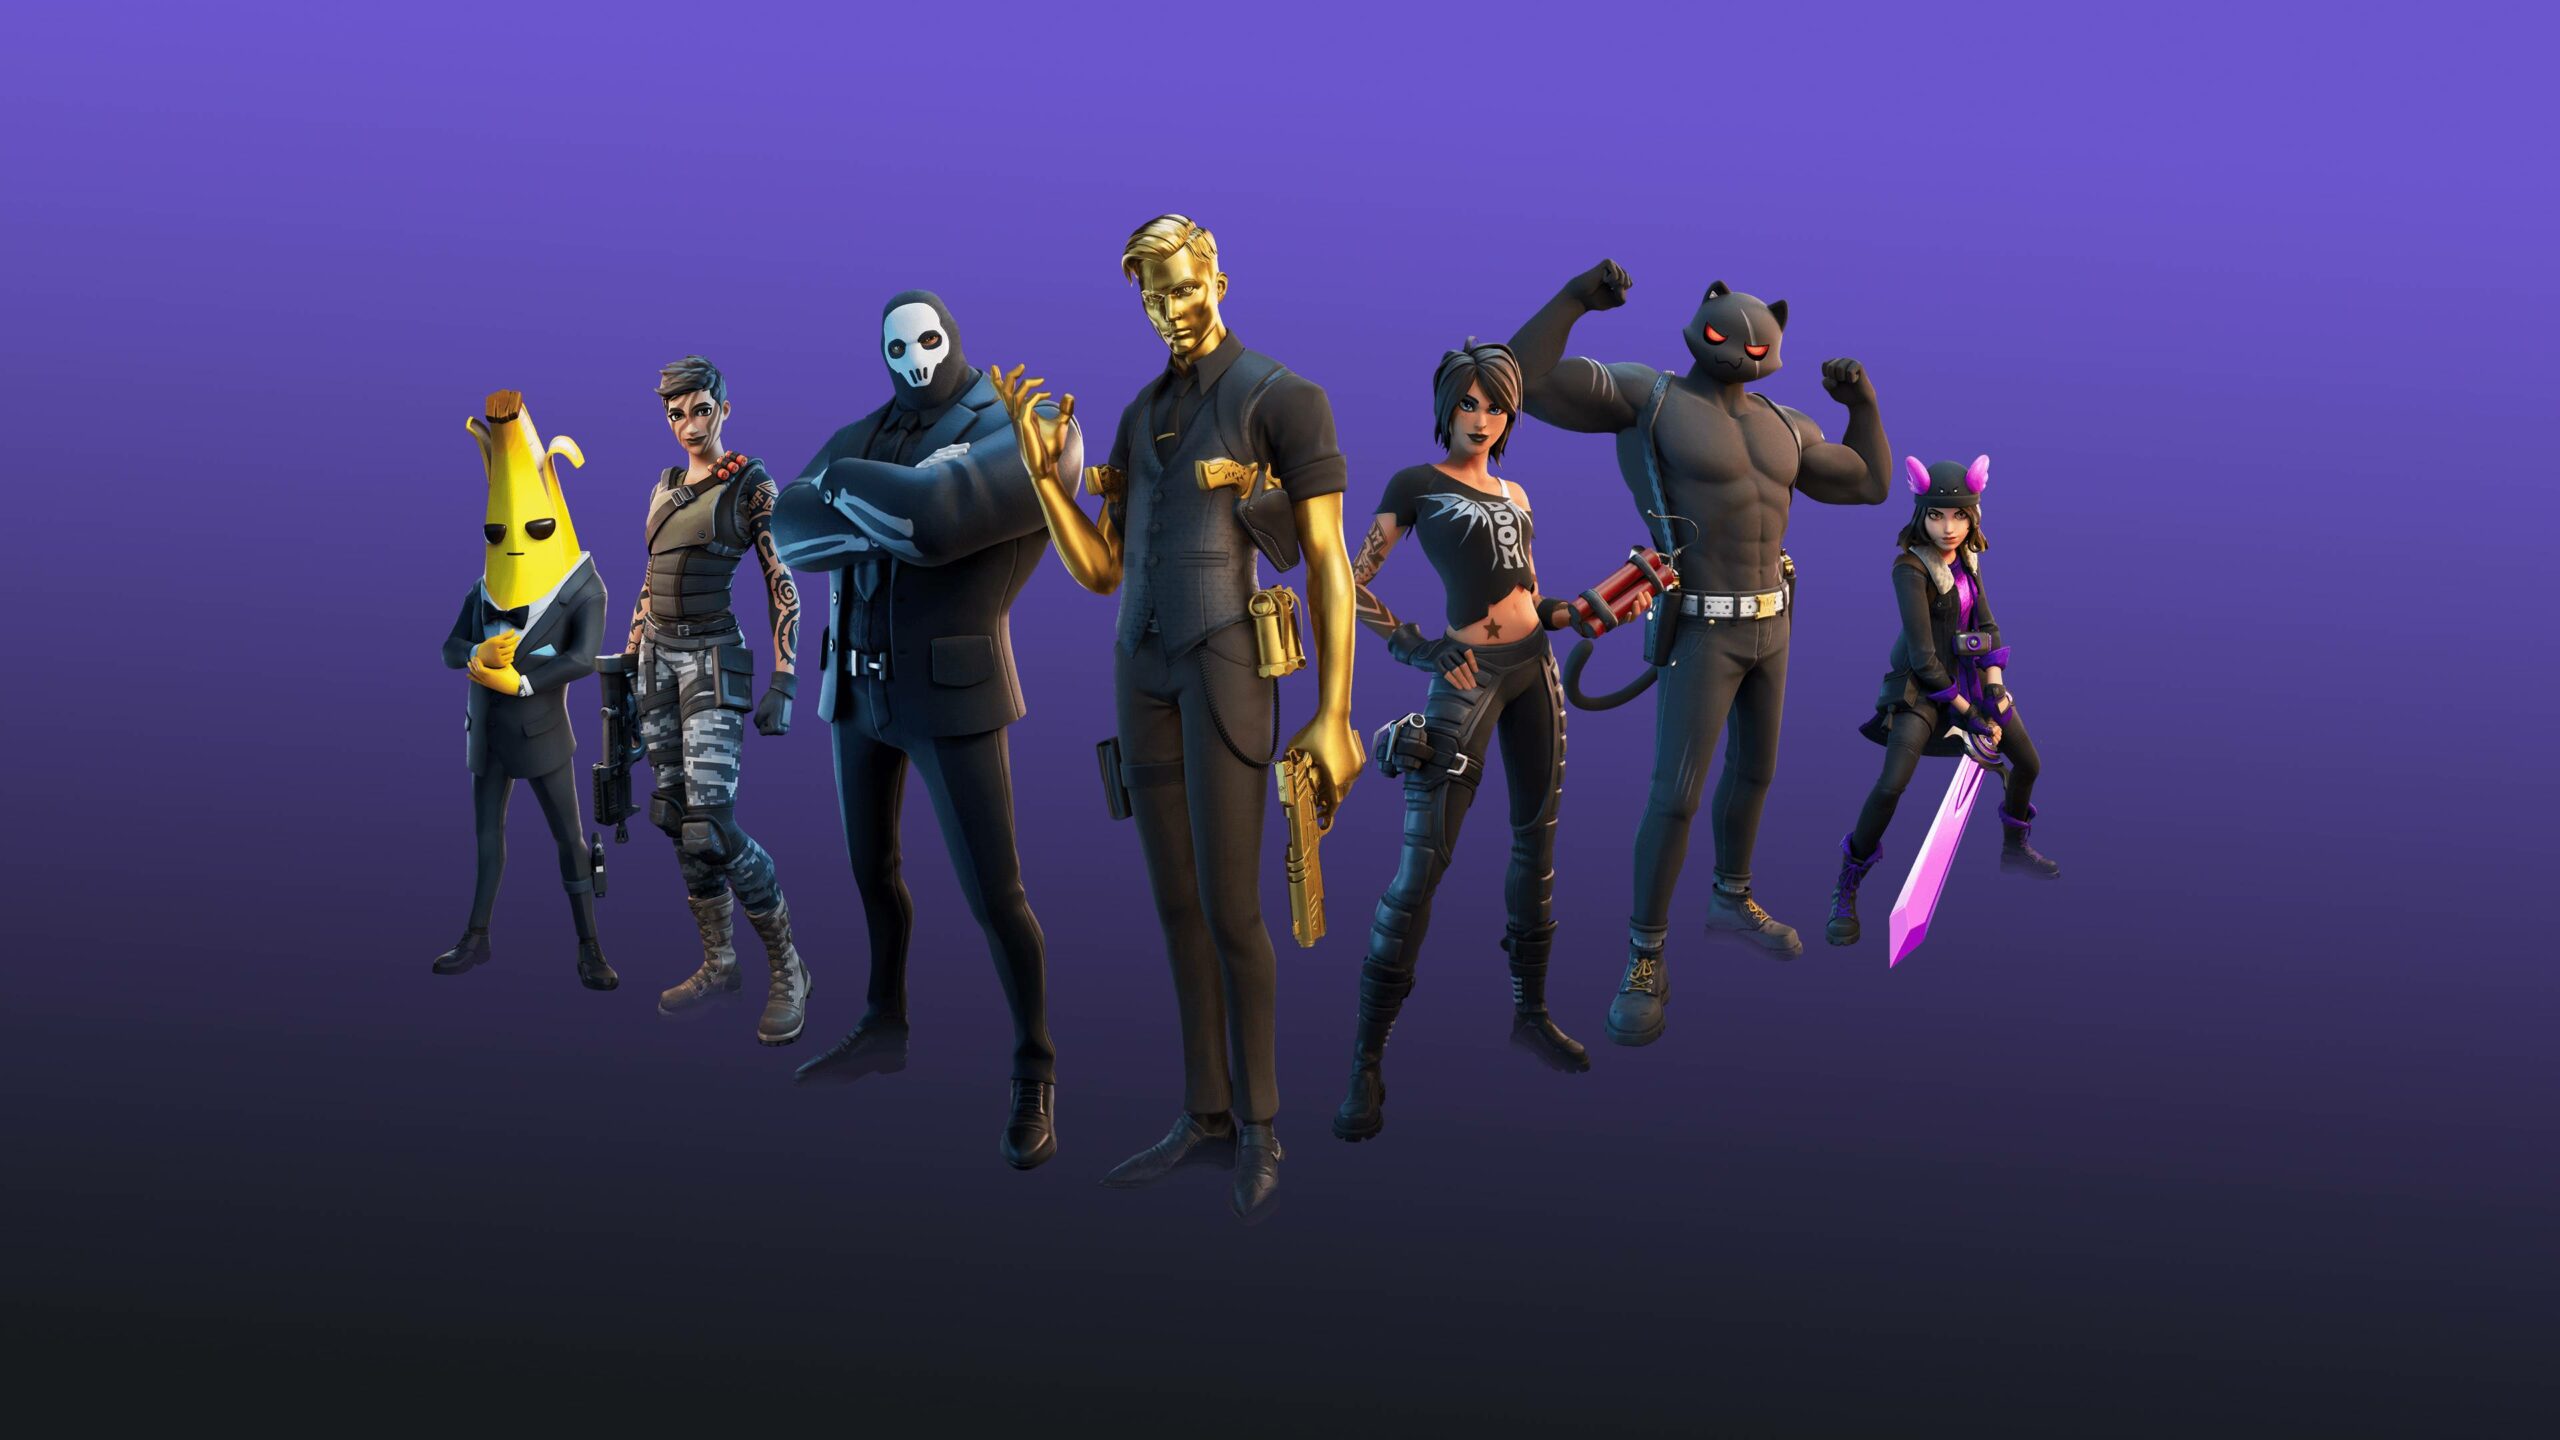 Fortnite Game Images Wallpapers